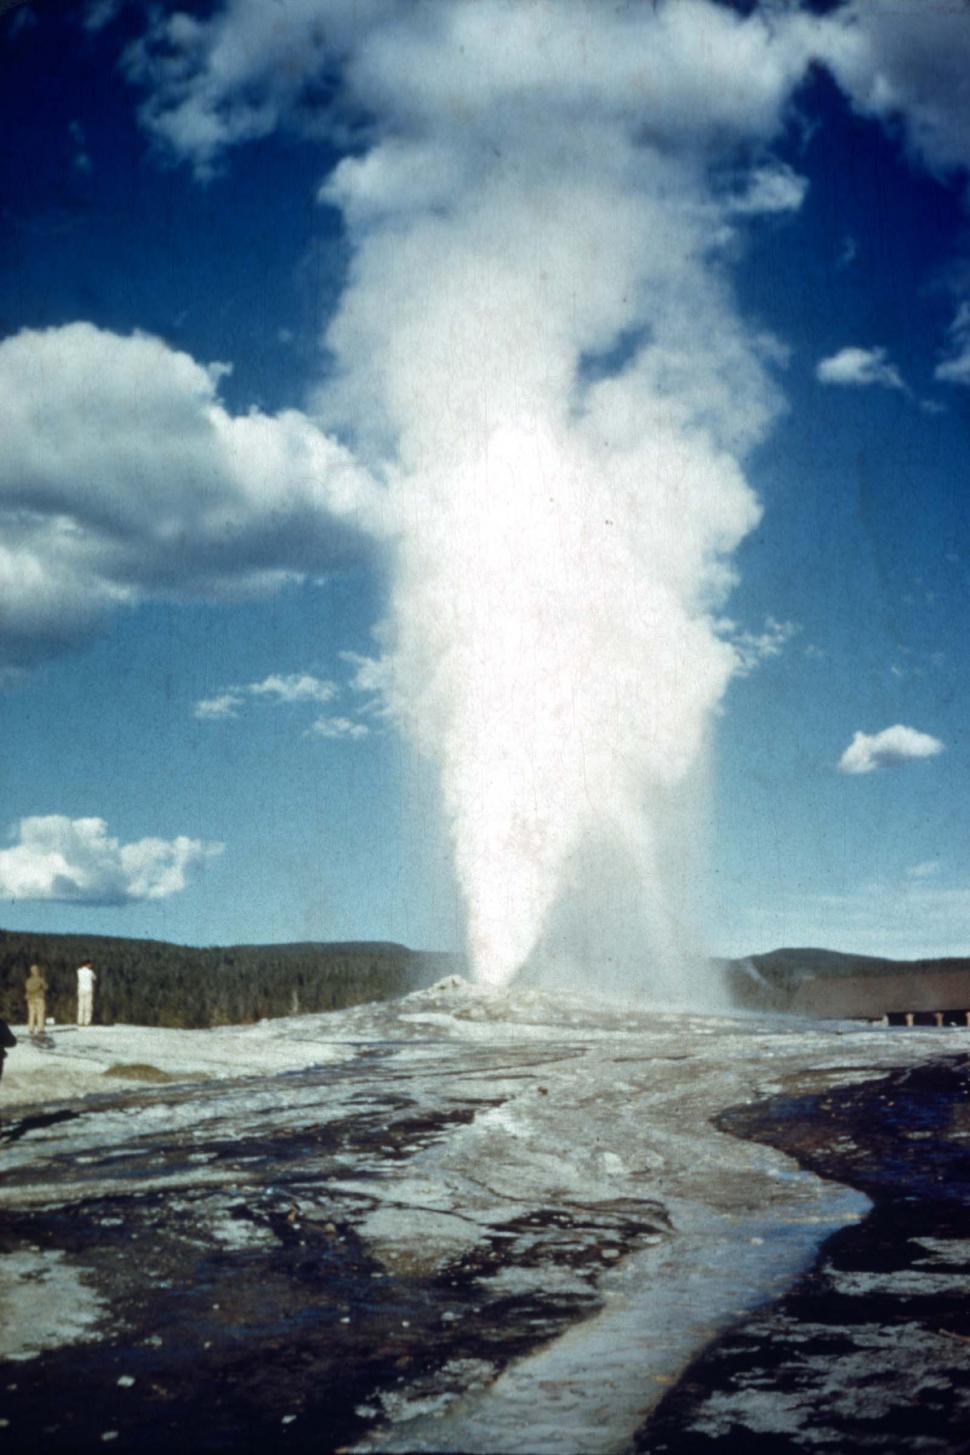 Free Image of Massive Geyser Spewing Water Into the Sky 